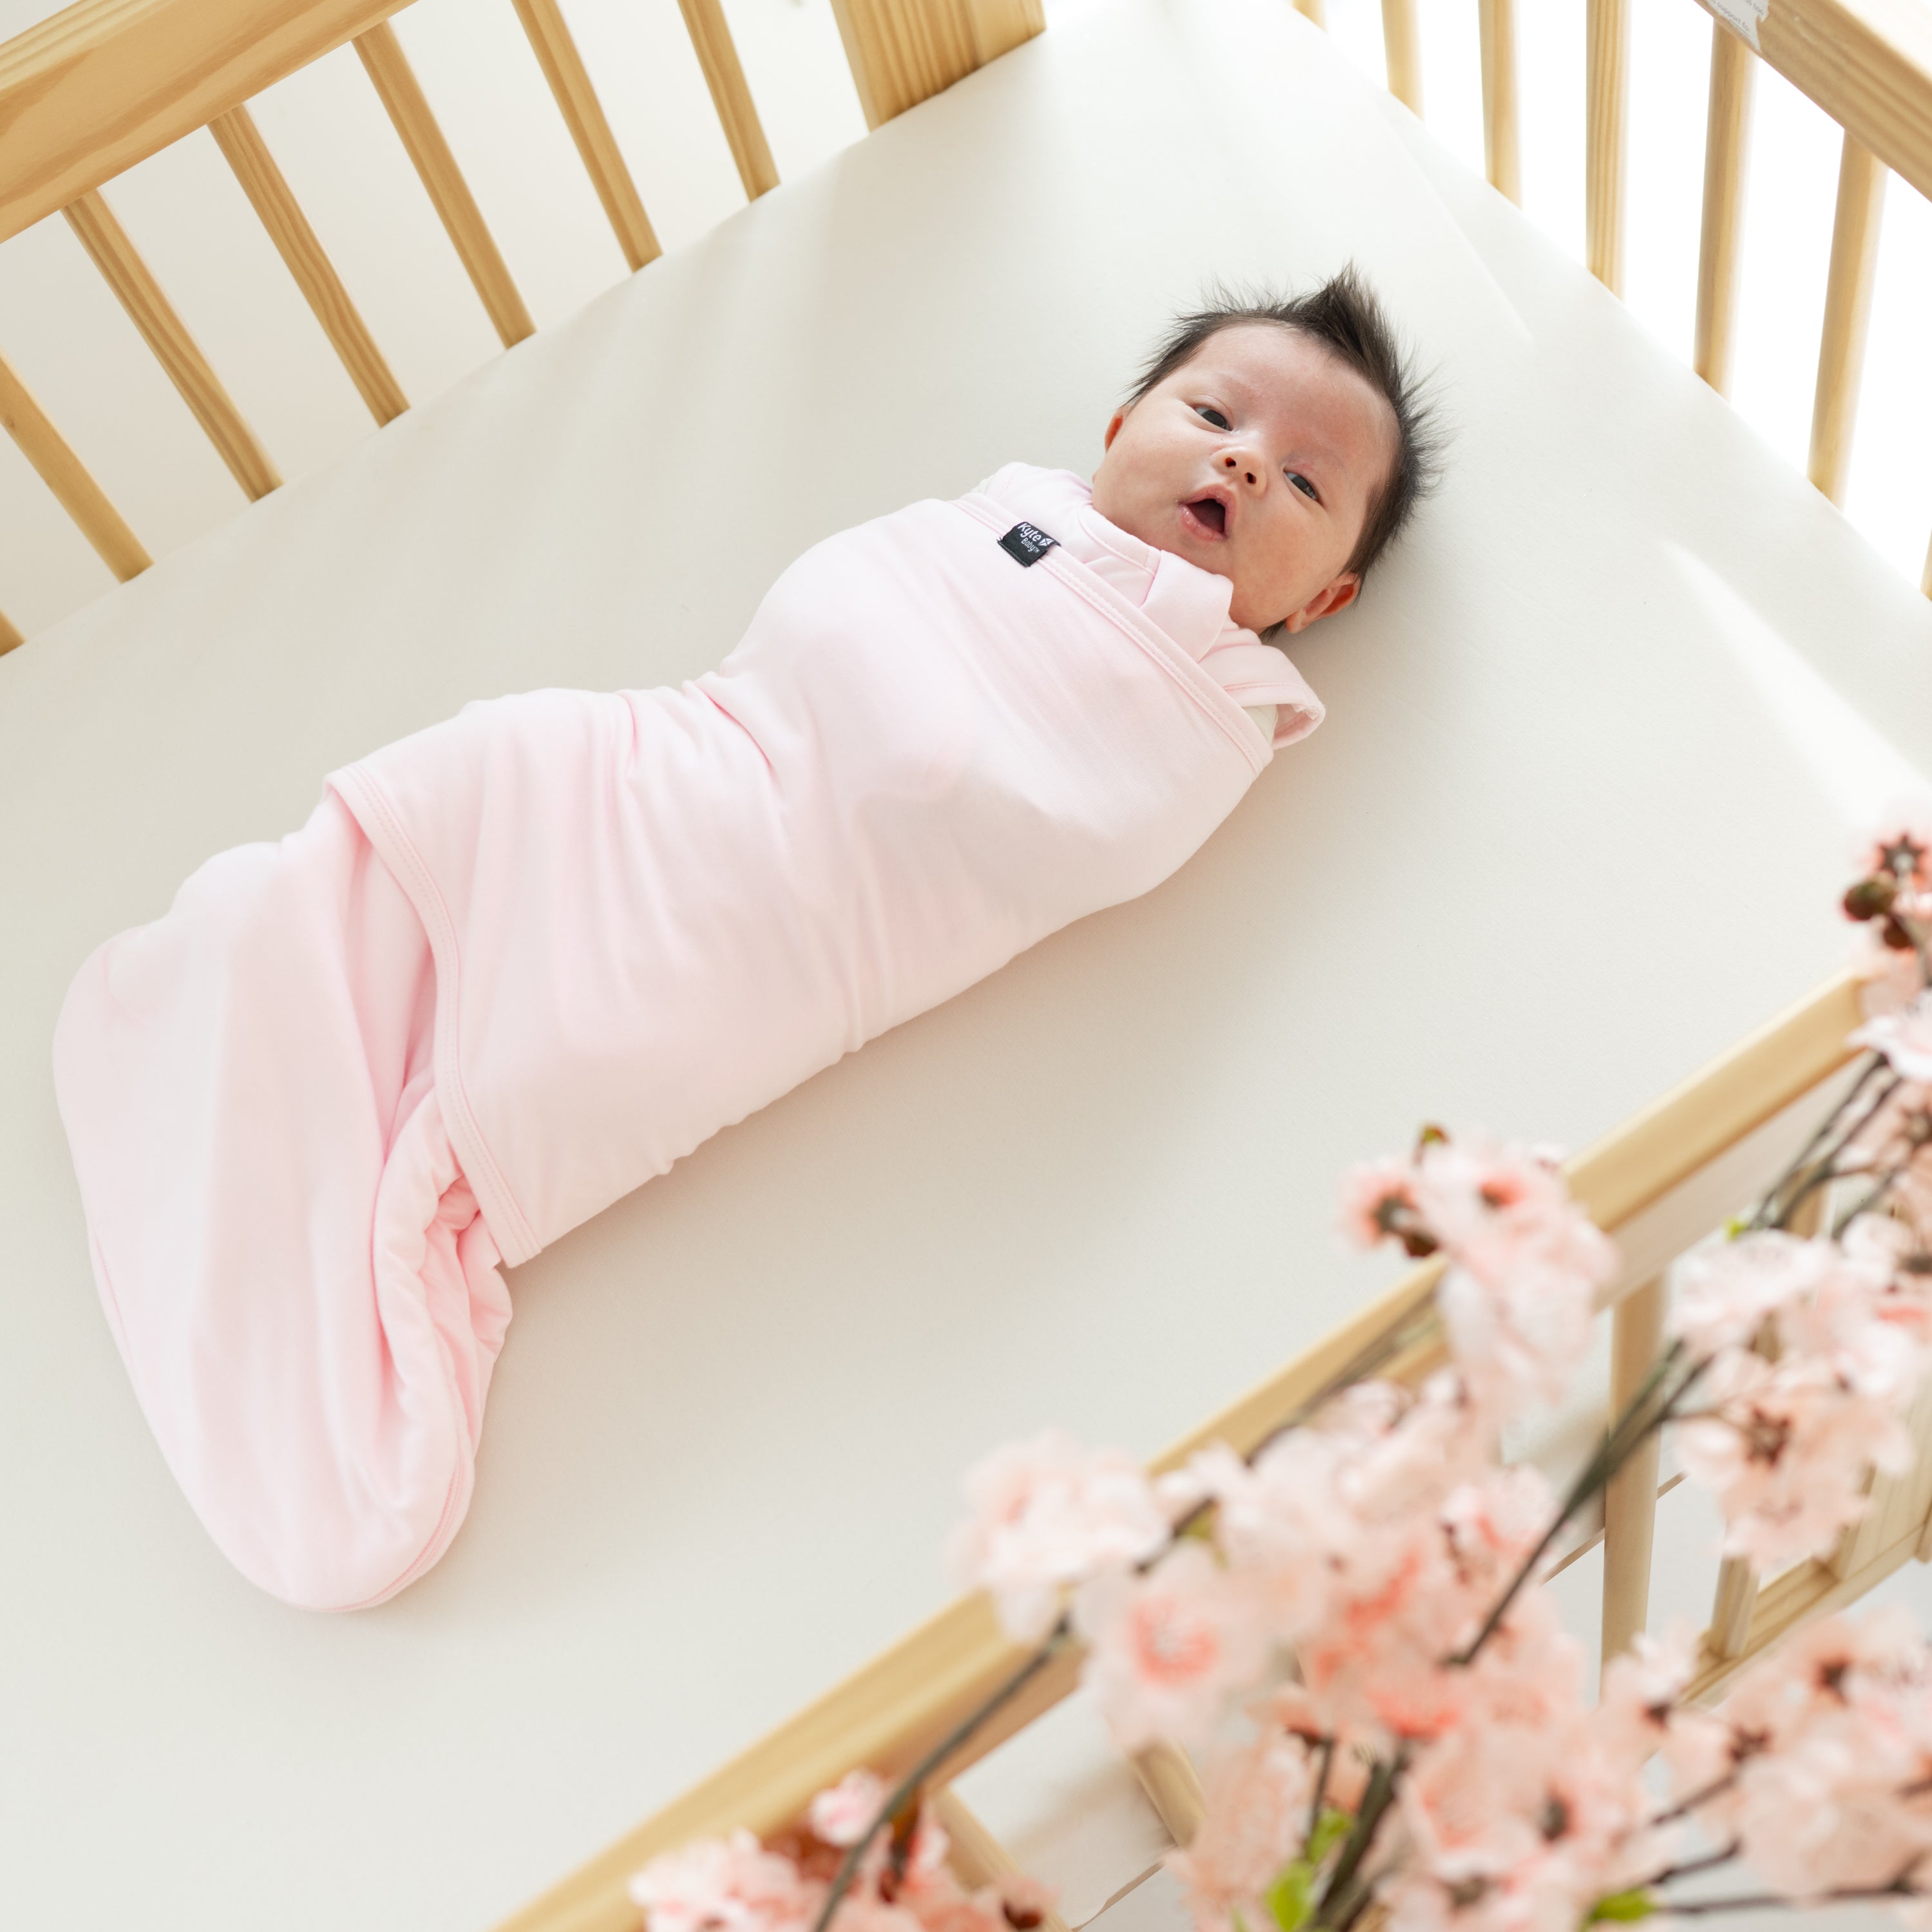 Tips to Help Your Baby Adjust to Daylight Saving Time